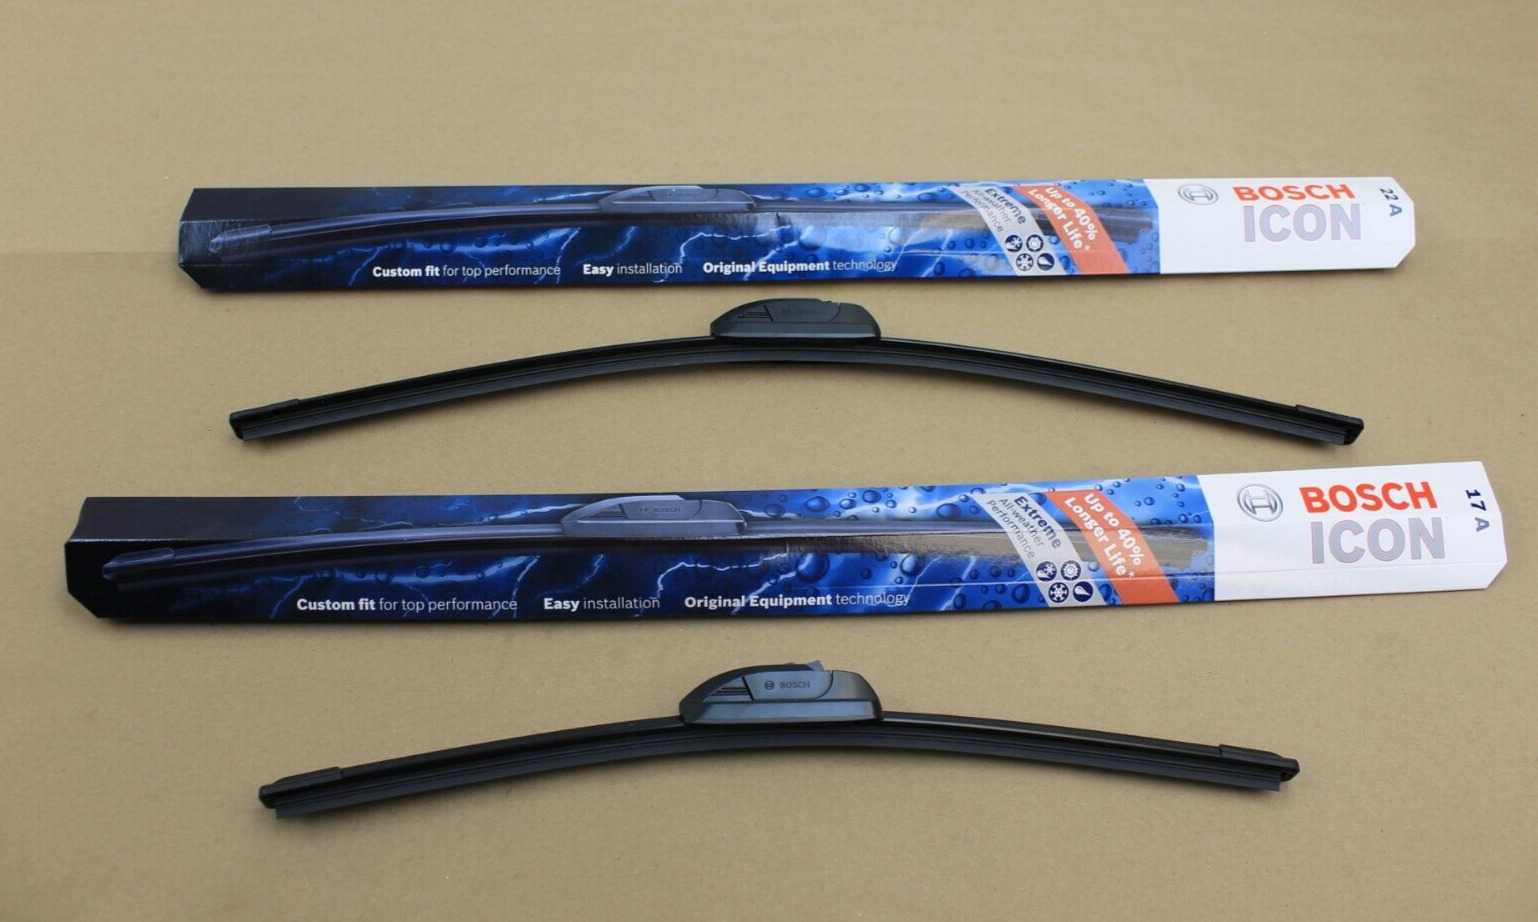 Bosch ICON Wiper Blades 22A17A (Set of 2) Fits Cobalt G5 Sunfire Sentra and more